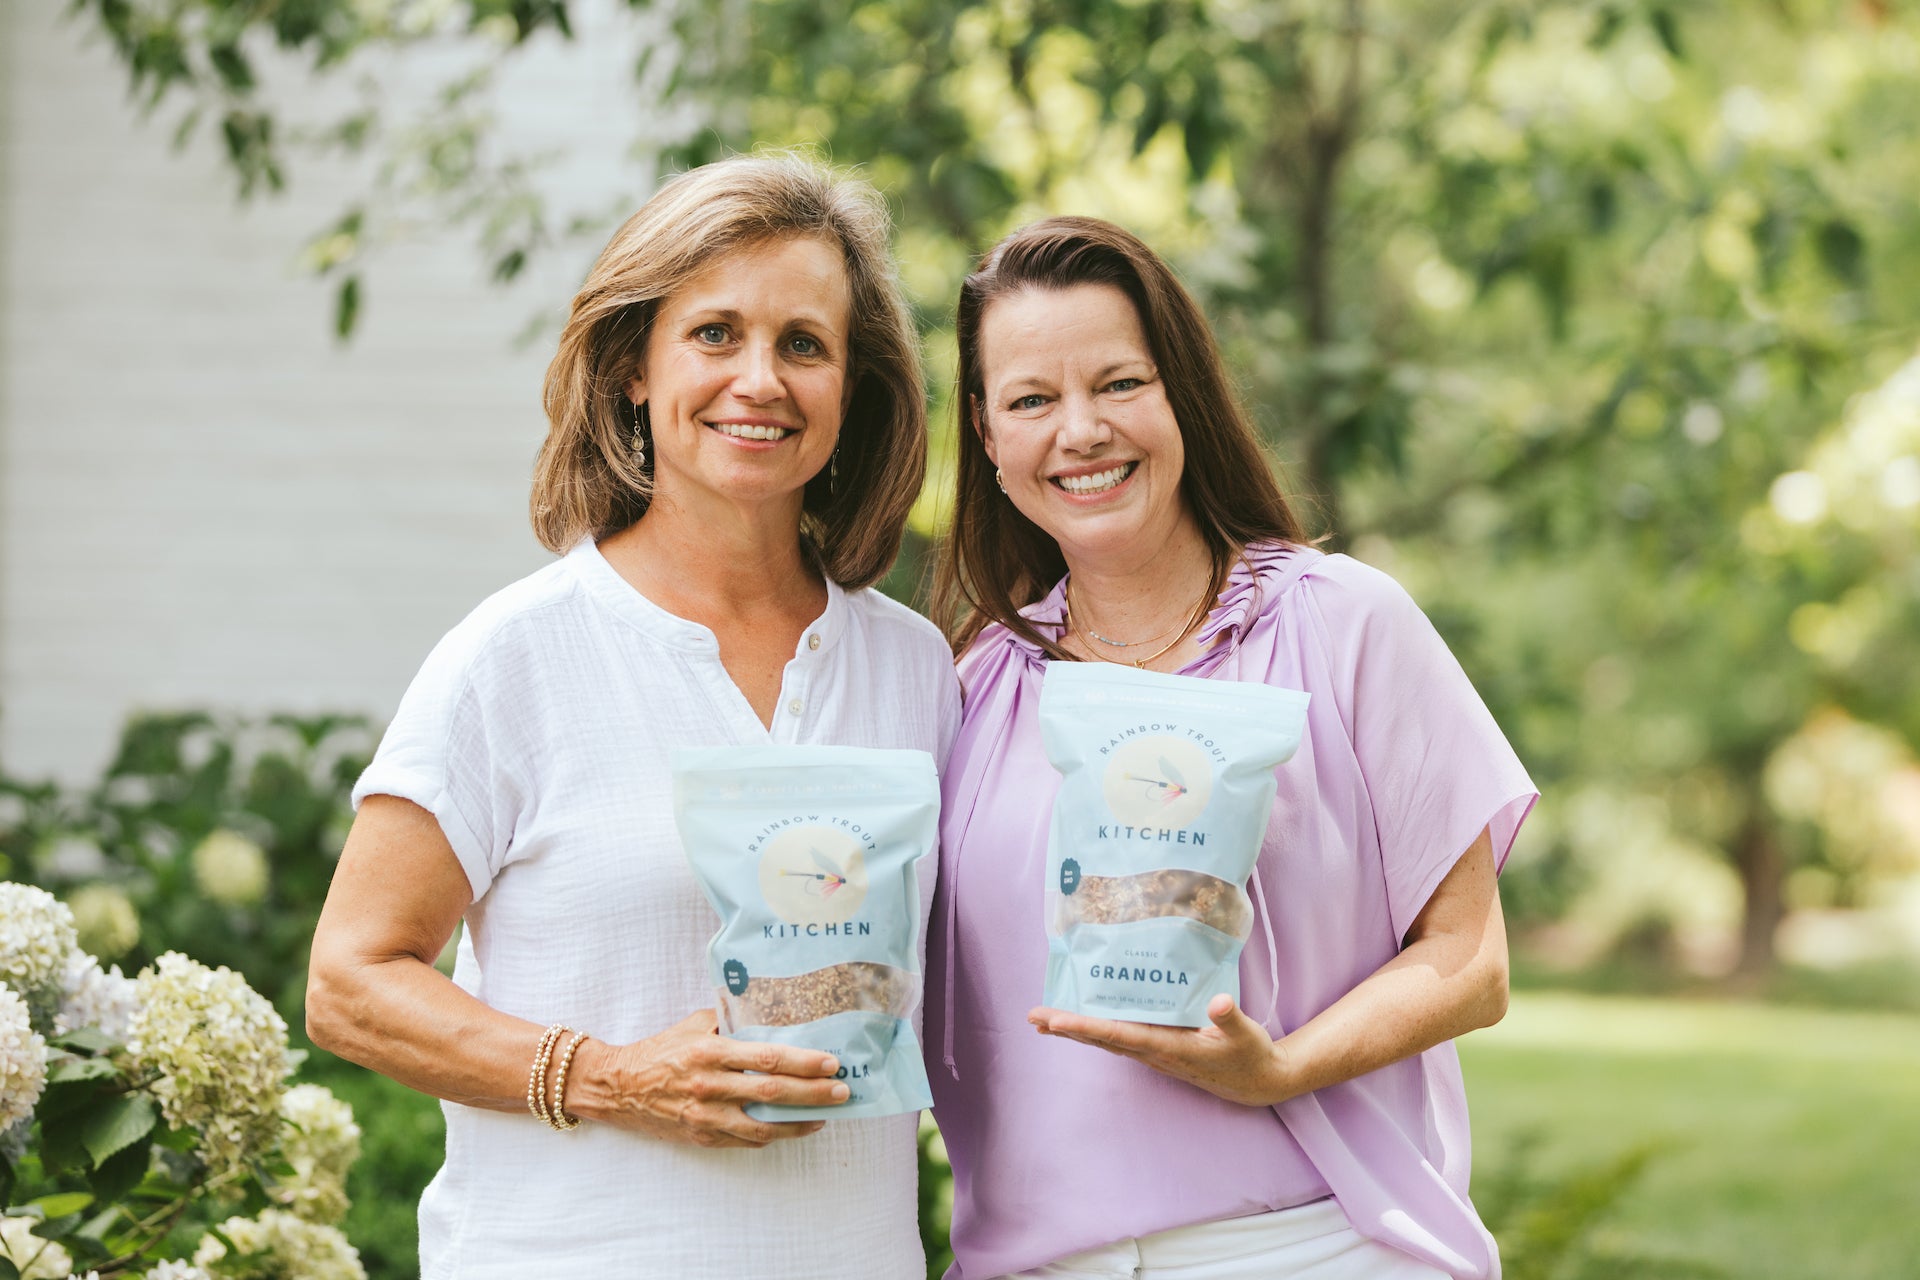 Jakie Bowles and Ashley Wallace of Rainbow Trout Kitchen granola, each holding a bag of 1 lb granola